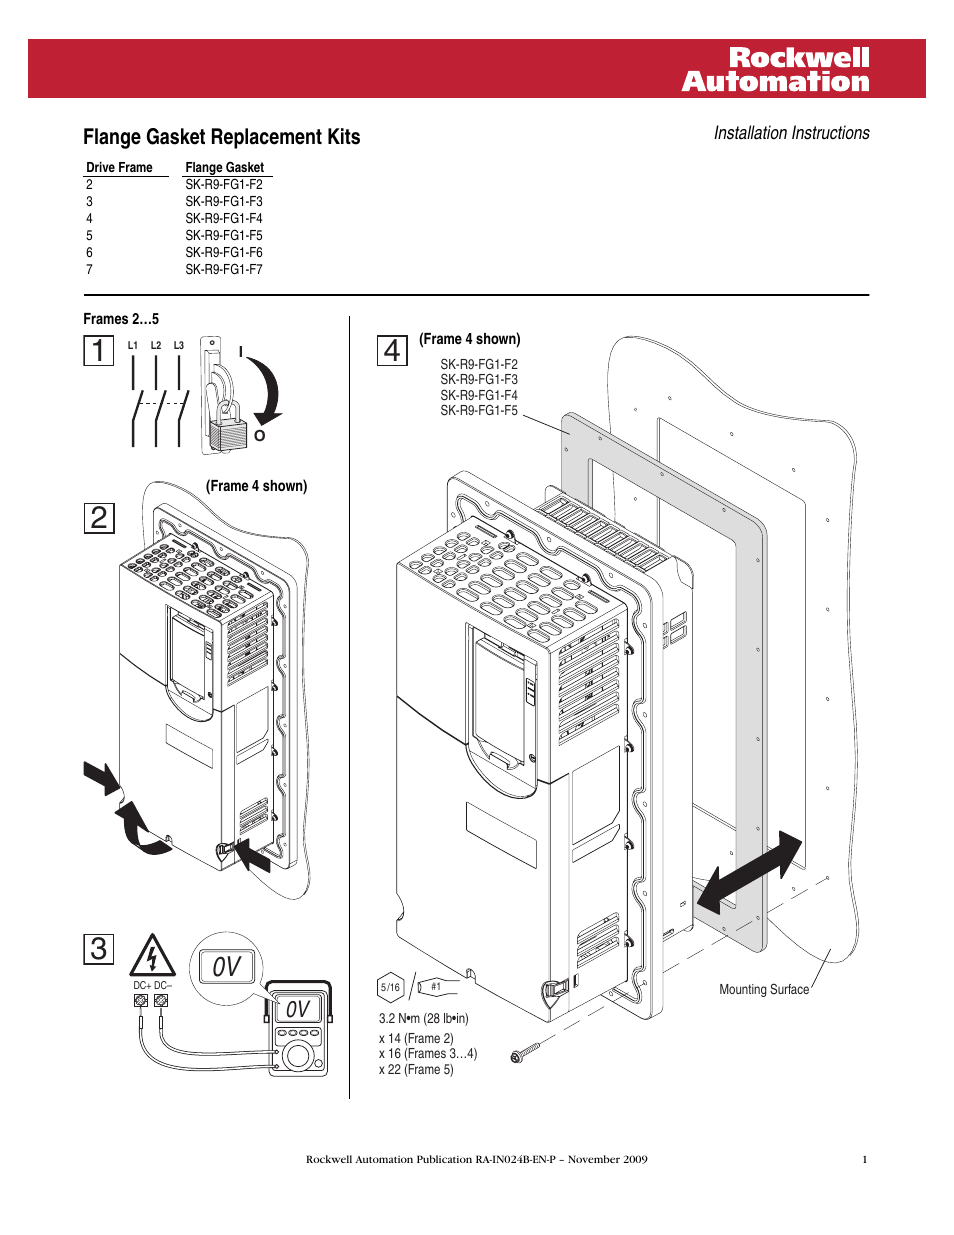 Rockwell Automation 753 Flange Gasket Replacement Kits User Manual | 4 pages